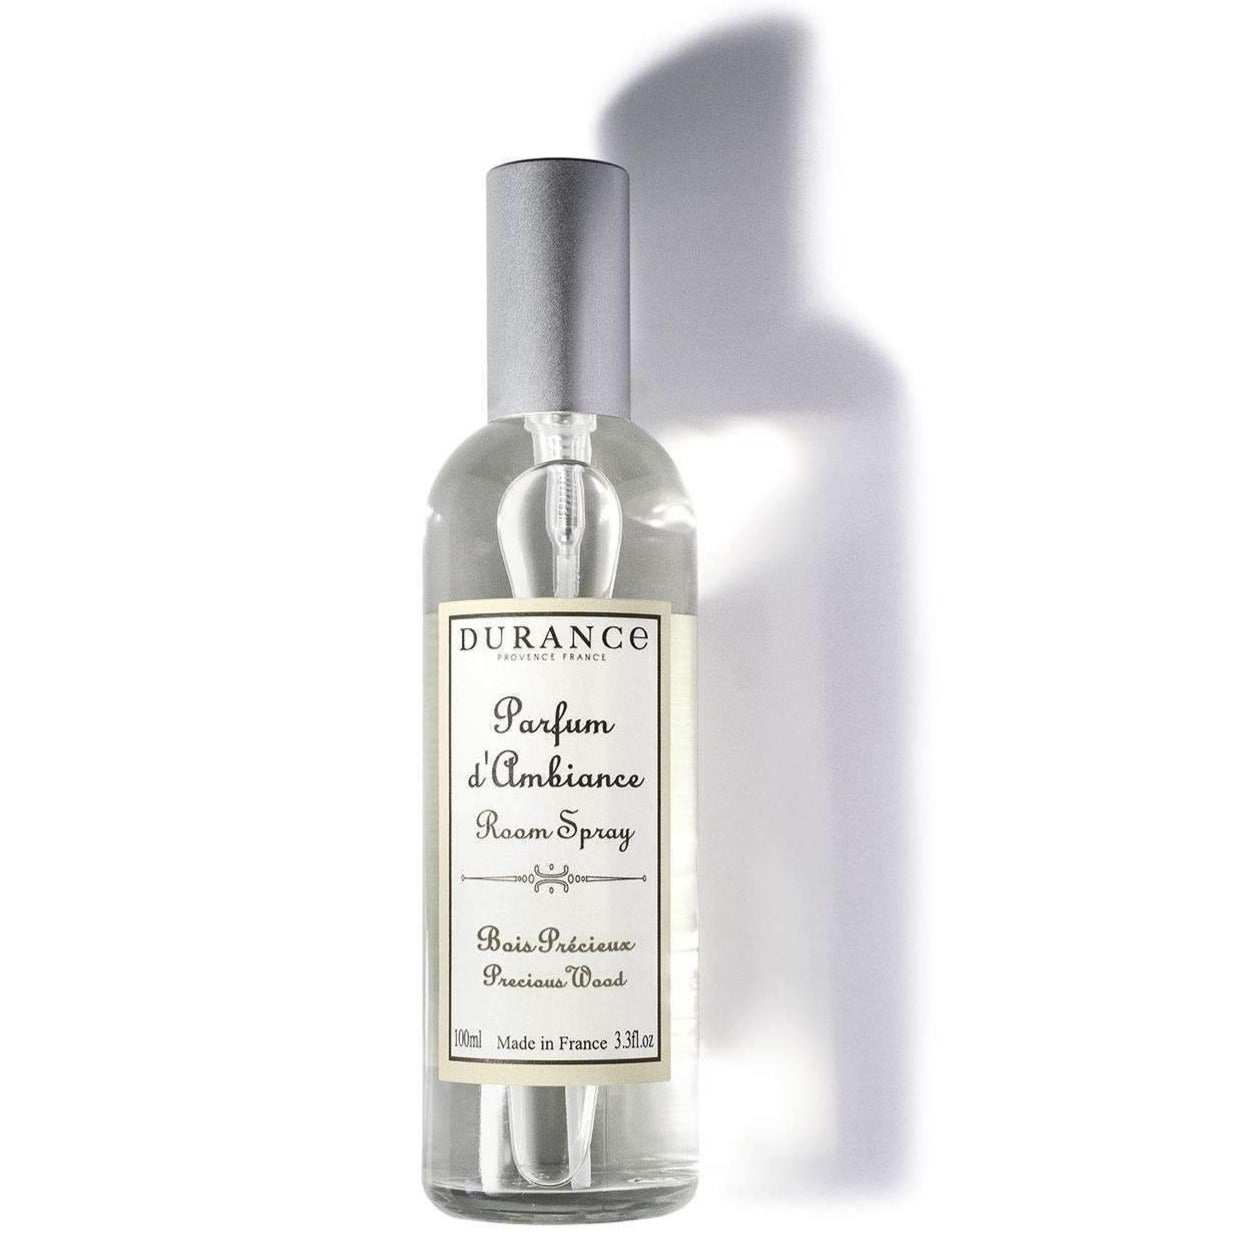 Durance home perfume, room fragrance, in glass bottle - Precious Wood